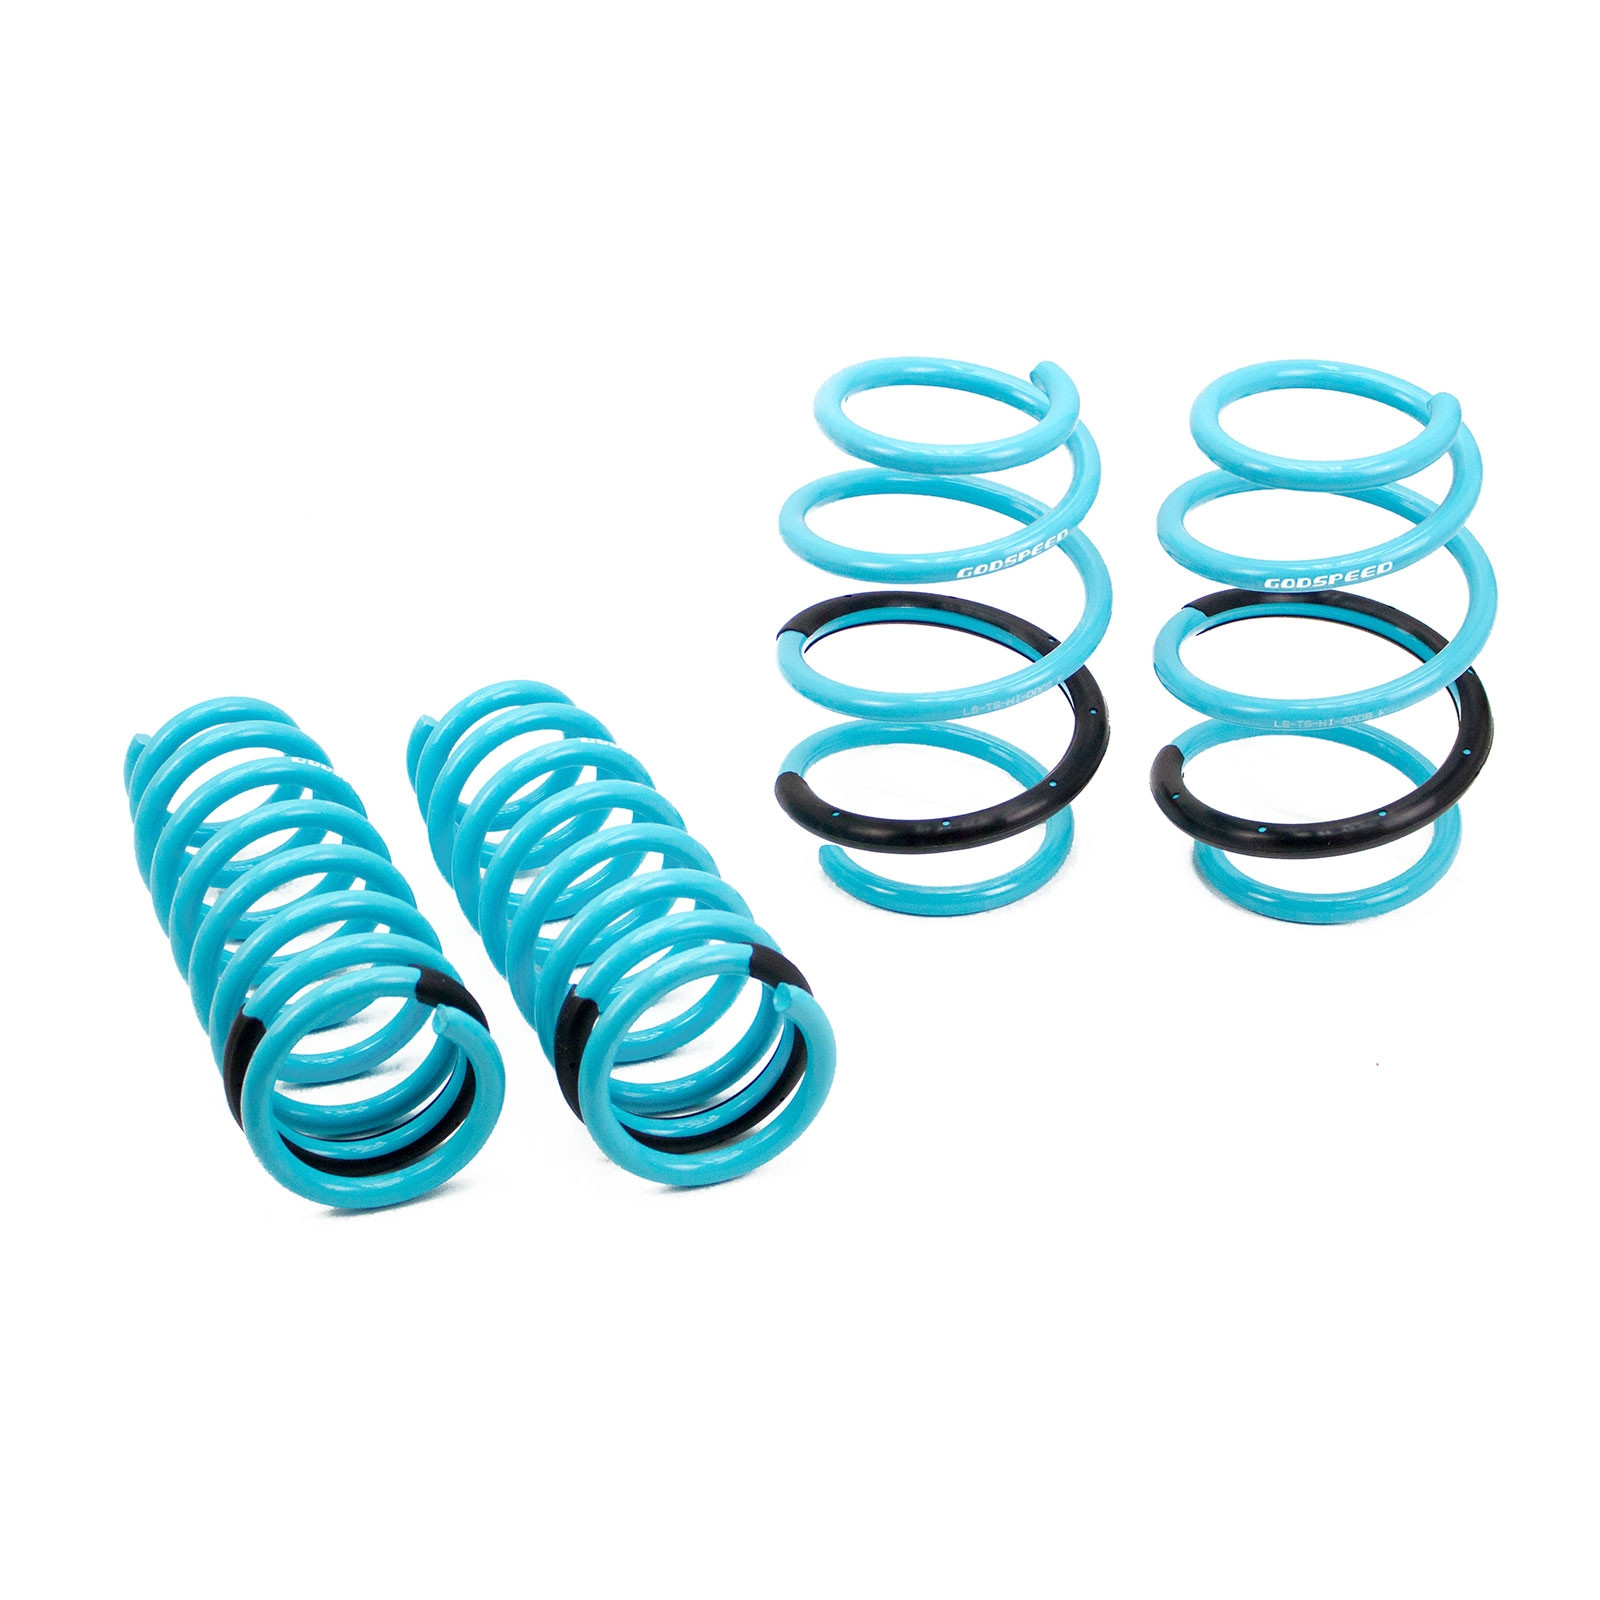 GSP Godspeed Traction S Springs Lowering Kit for Kia Optima 11-15 TF New